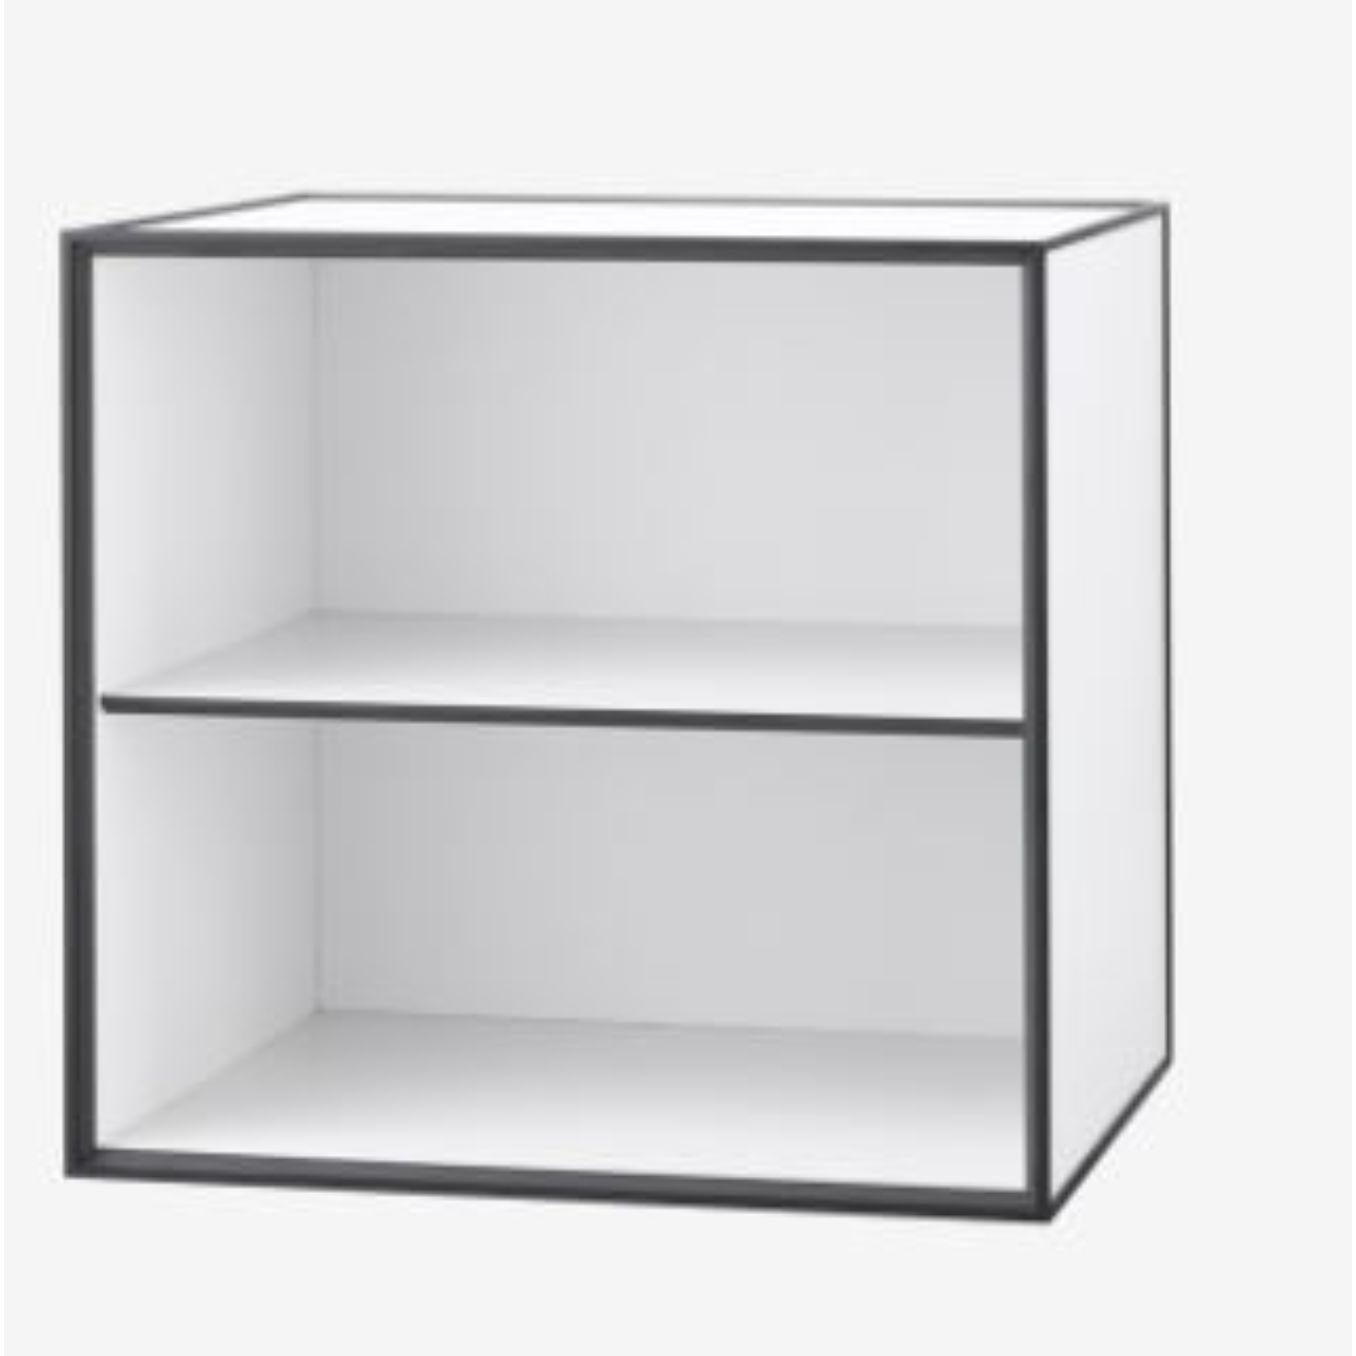 Other 49 Black Ash Frame Box with Shelf by Lassen For Sale